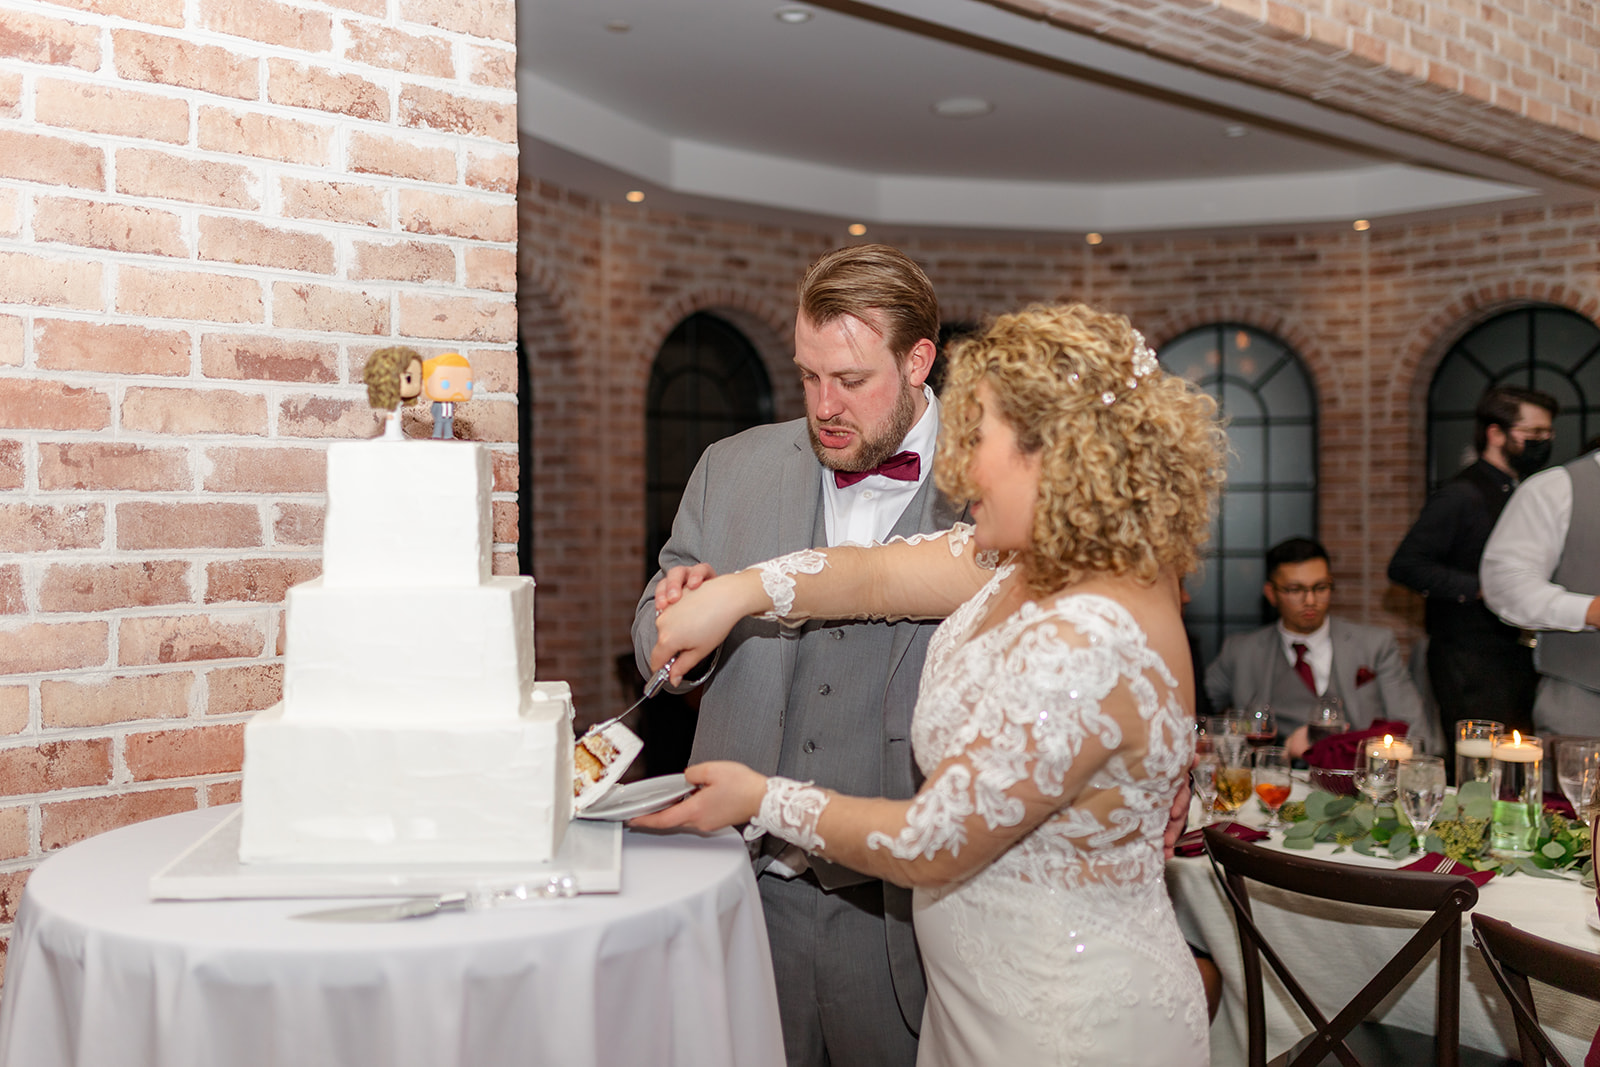 Newlyweds cut their cake together in a brick walled room at their The Refinery At Perona Farms wedding